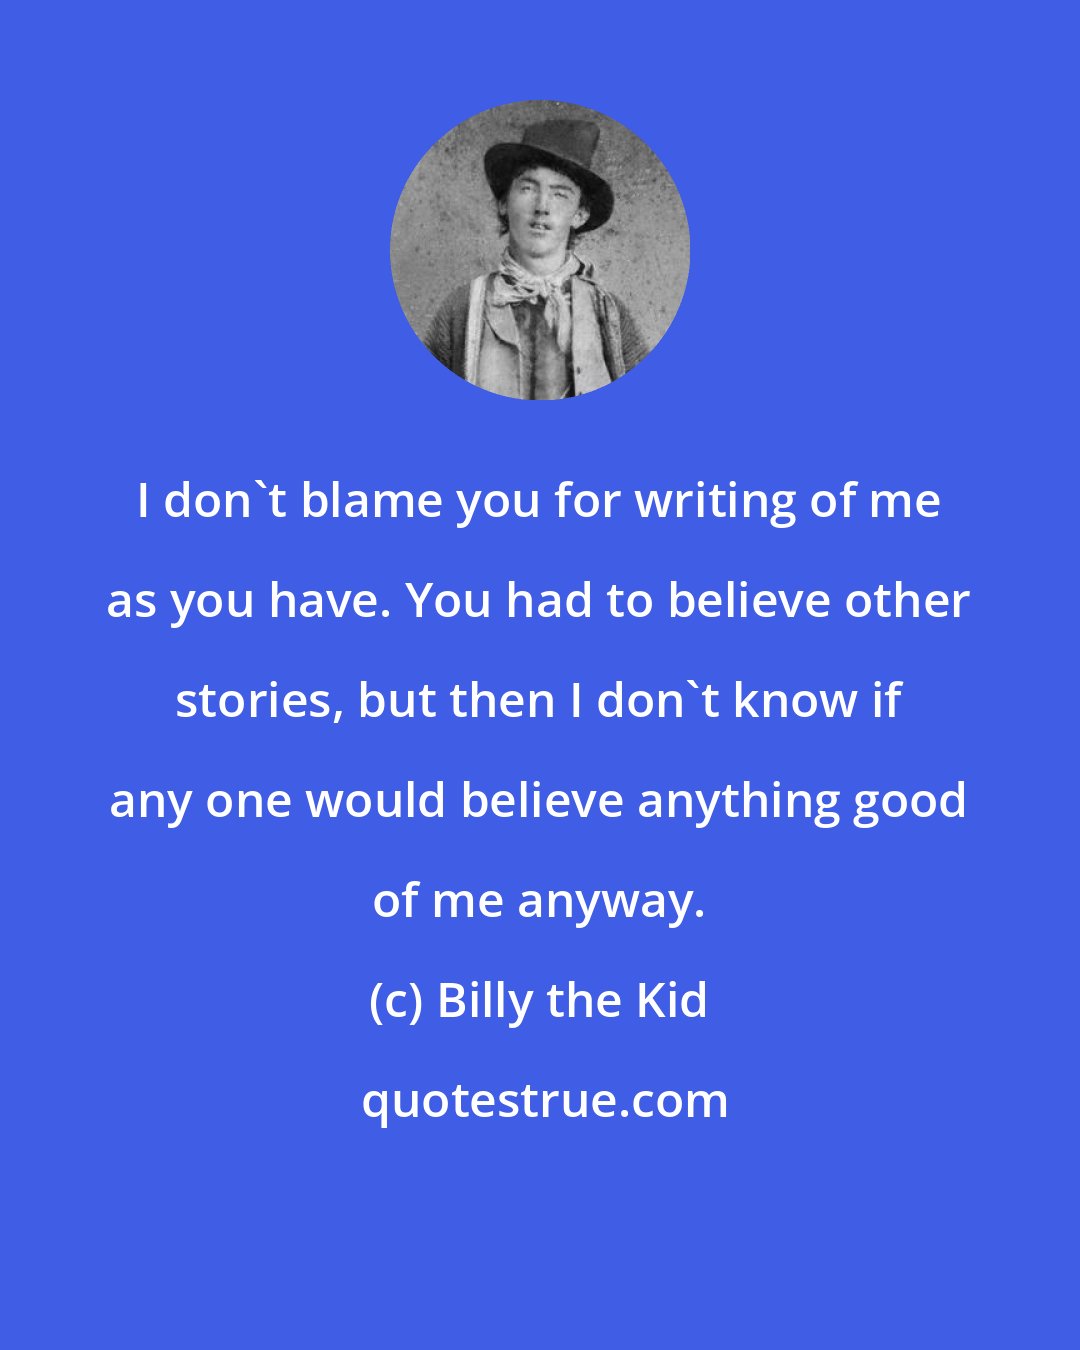 Billy the Kid: I don't blame you for writing of me as you have. You had to believe other stories, but then I don't know if any one would believe anything good of me anyway.